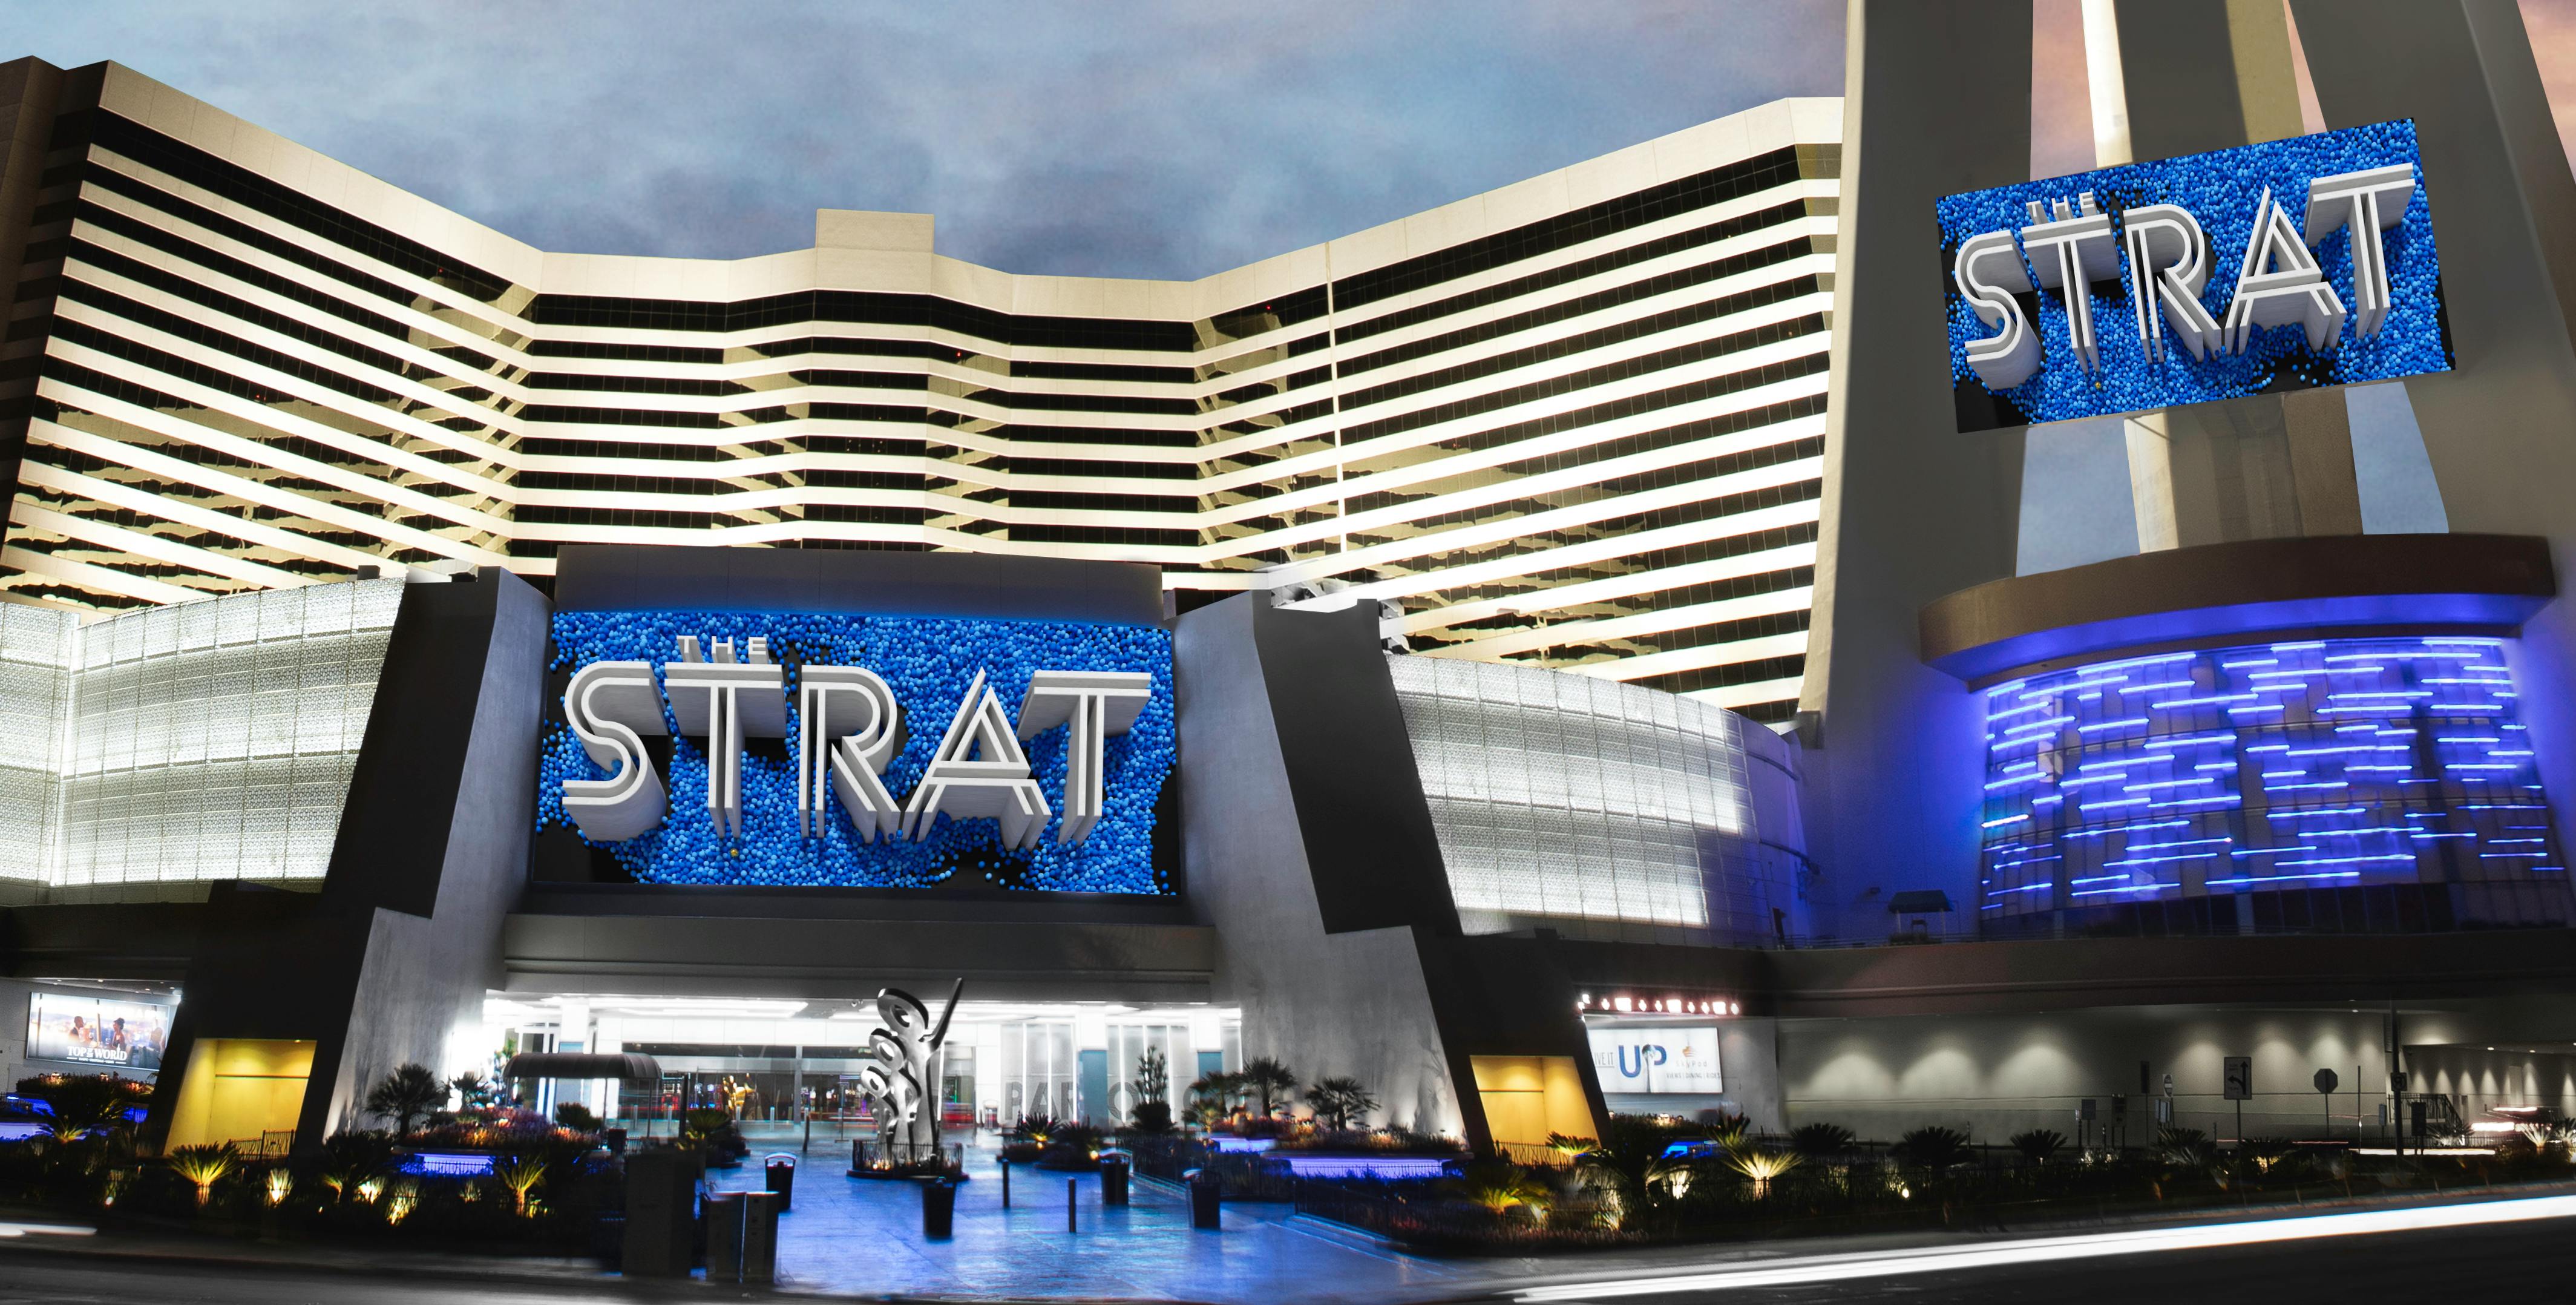 Stratosphere Casino, Hotel & Tower: Observation Deck and Thrill Rides